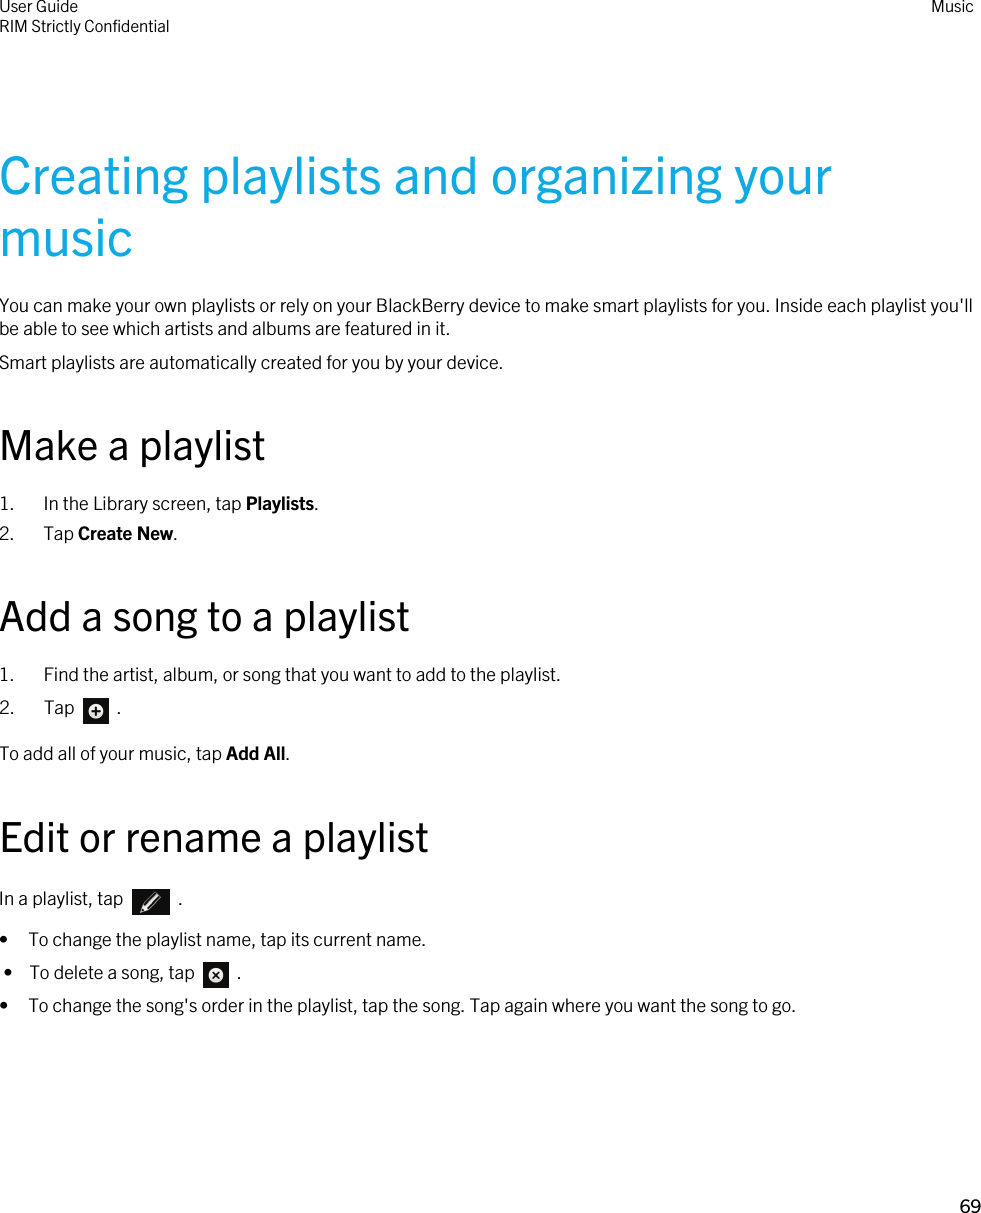 Creating playlists and organizing your musicYou can make your own playlists or rely on your BlackBerry device to make smart playlists for you. Inside each playlist you&apos;ll be able to see which artists and albums are featured in it.Smart playlists are automatically created for you by your device.Make a playlist1. In the Library screen, tap Playlists.2. Tap Create New.Add a song to a playlist1. Find the artist, album, or song that you want to add to the playlist.2.  Tap    .To add all of your music, tap Add All.Edit or rename a playlistIn a playlist, tap    .• To change the playlist name, tap its current name. •  To delete a song, tap    .• To change the song&apos;s order in the playlist, tap the song. Tap again where you want the song to go.User GuideRIM Strictly ConfidentialMusic69 